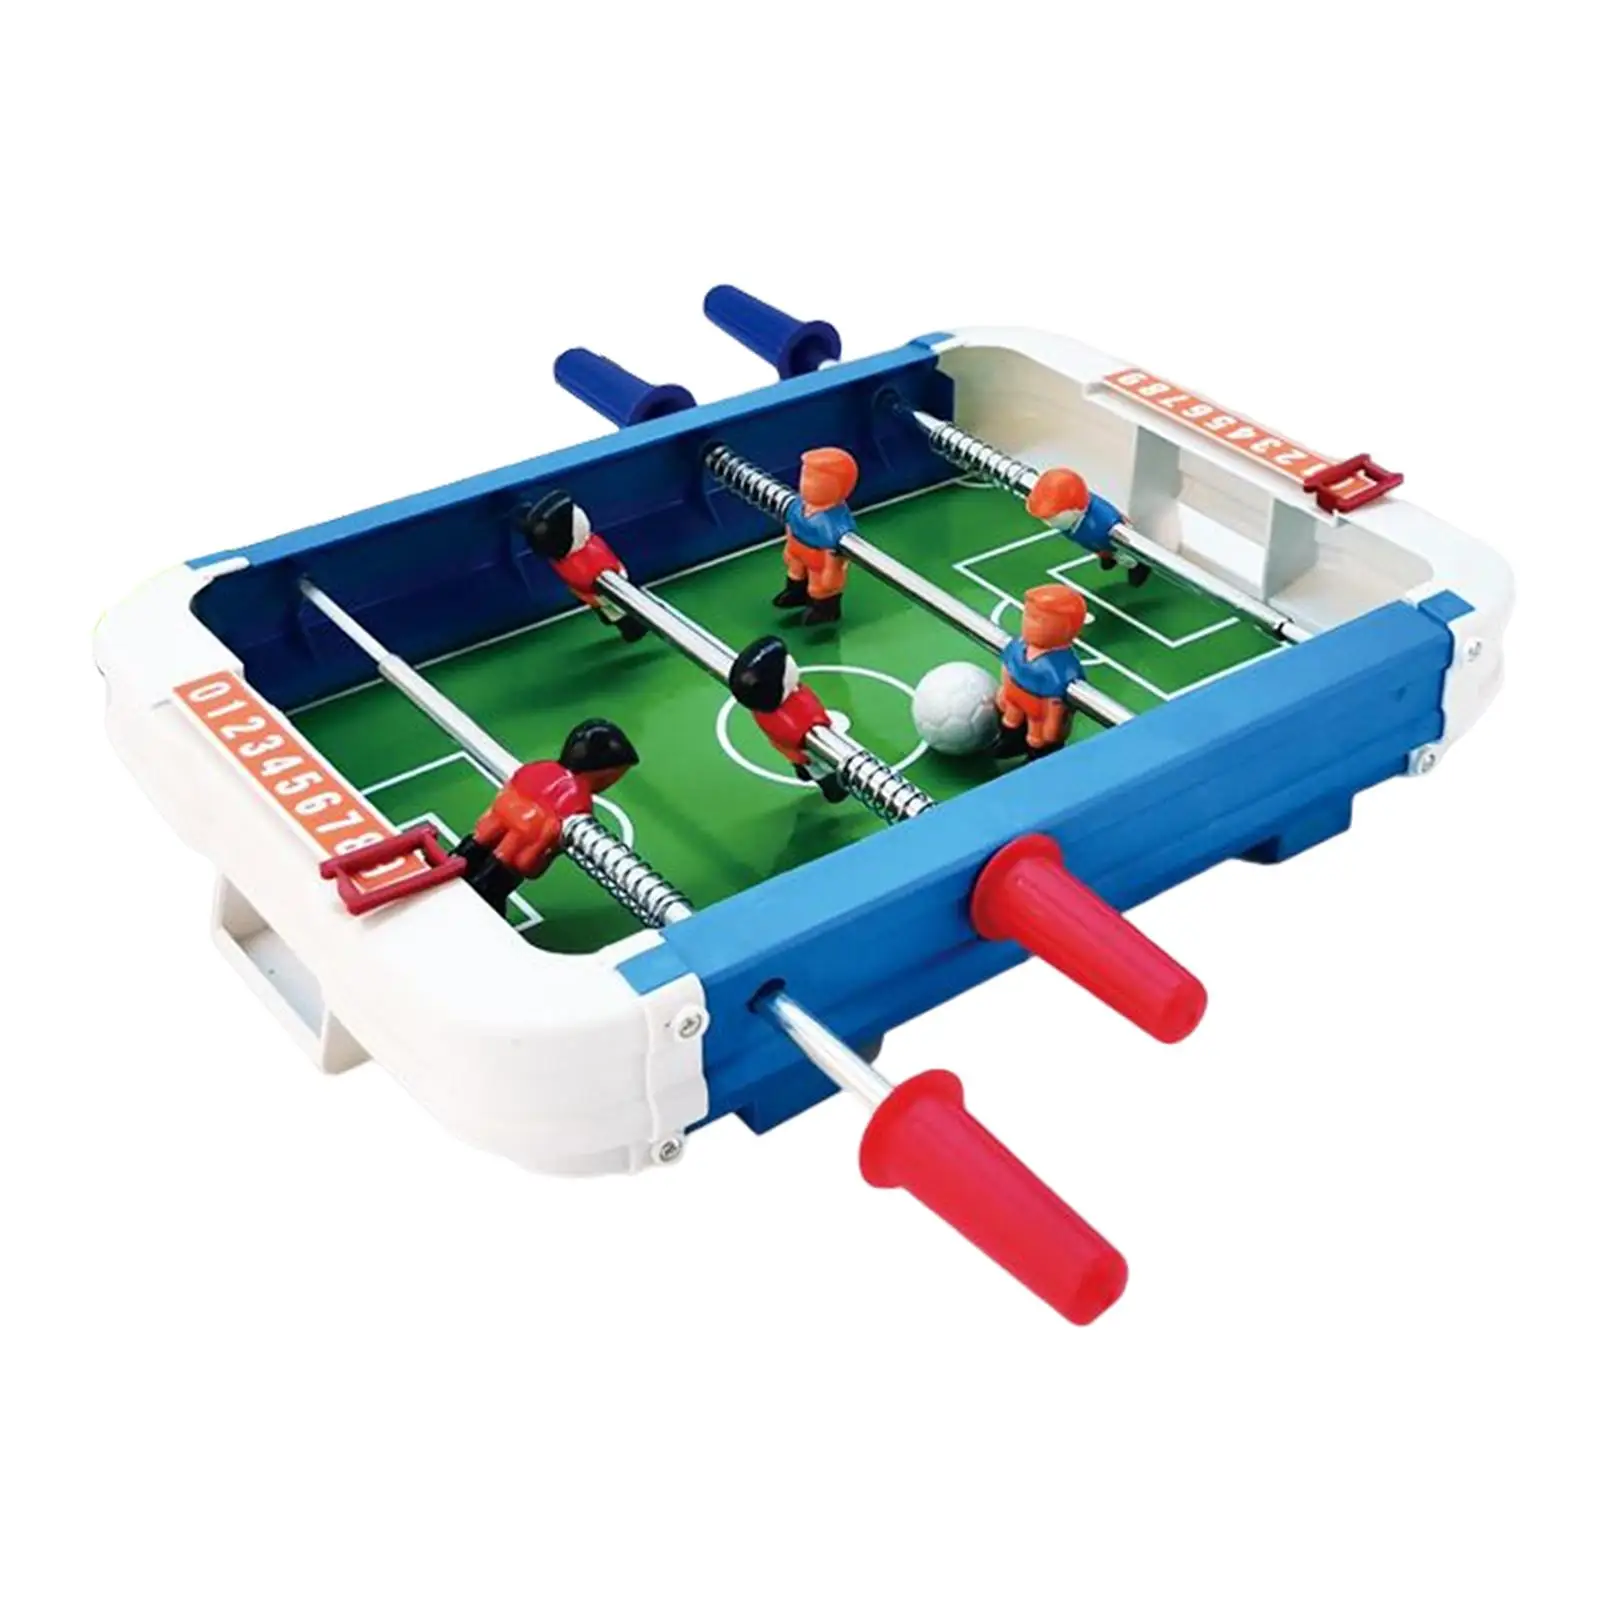 Small Foosball Table, Tabletop Football Game Interactive Toy Competitive Soccer Family Game Desktop Sport Board for Game Rooms